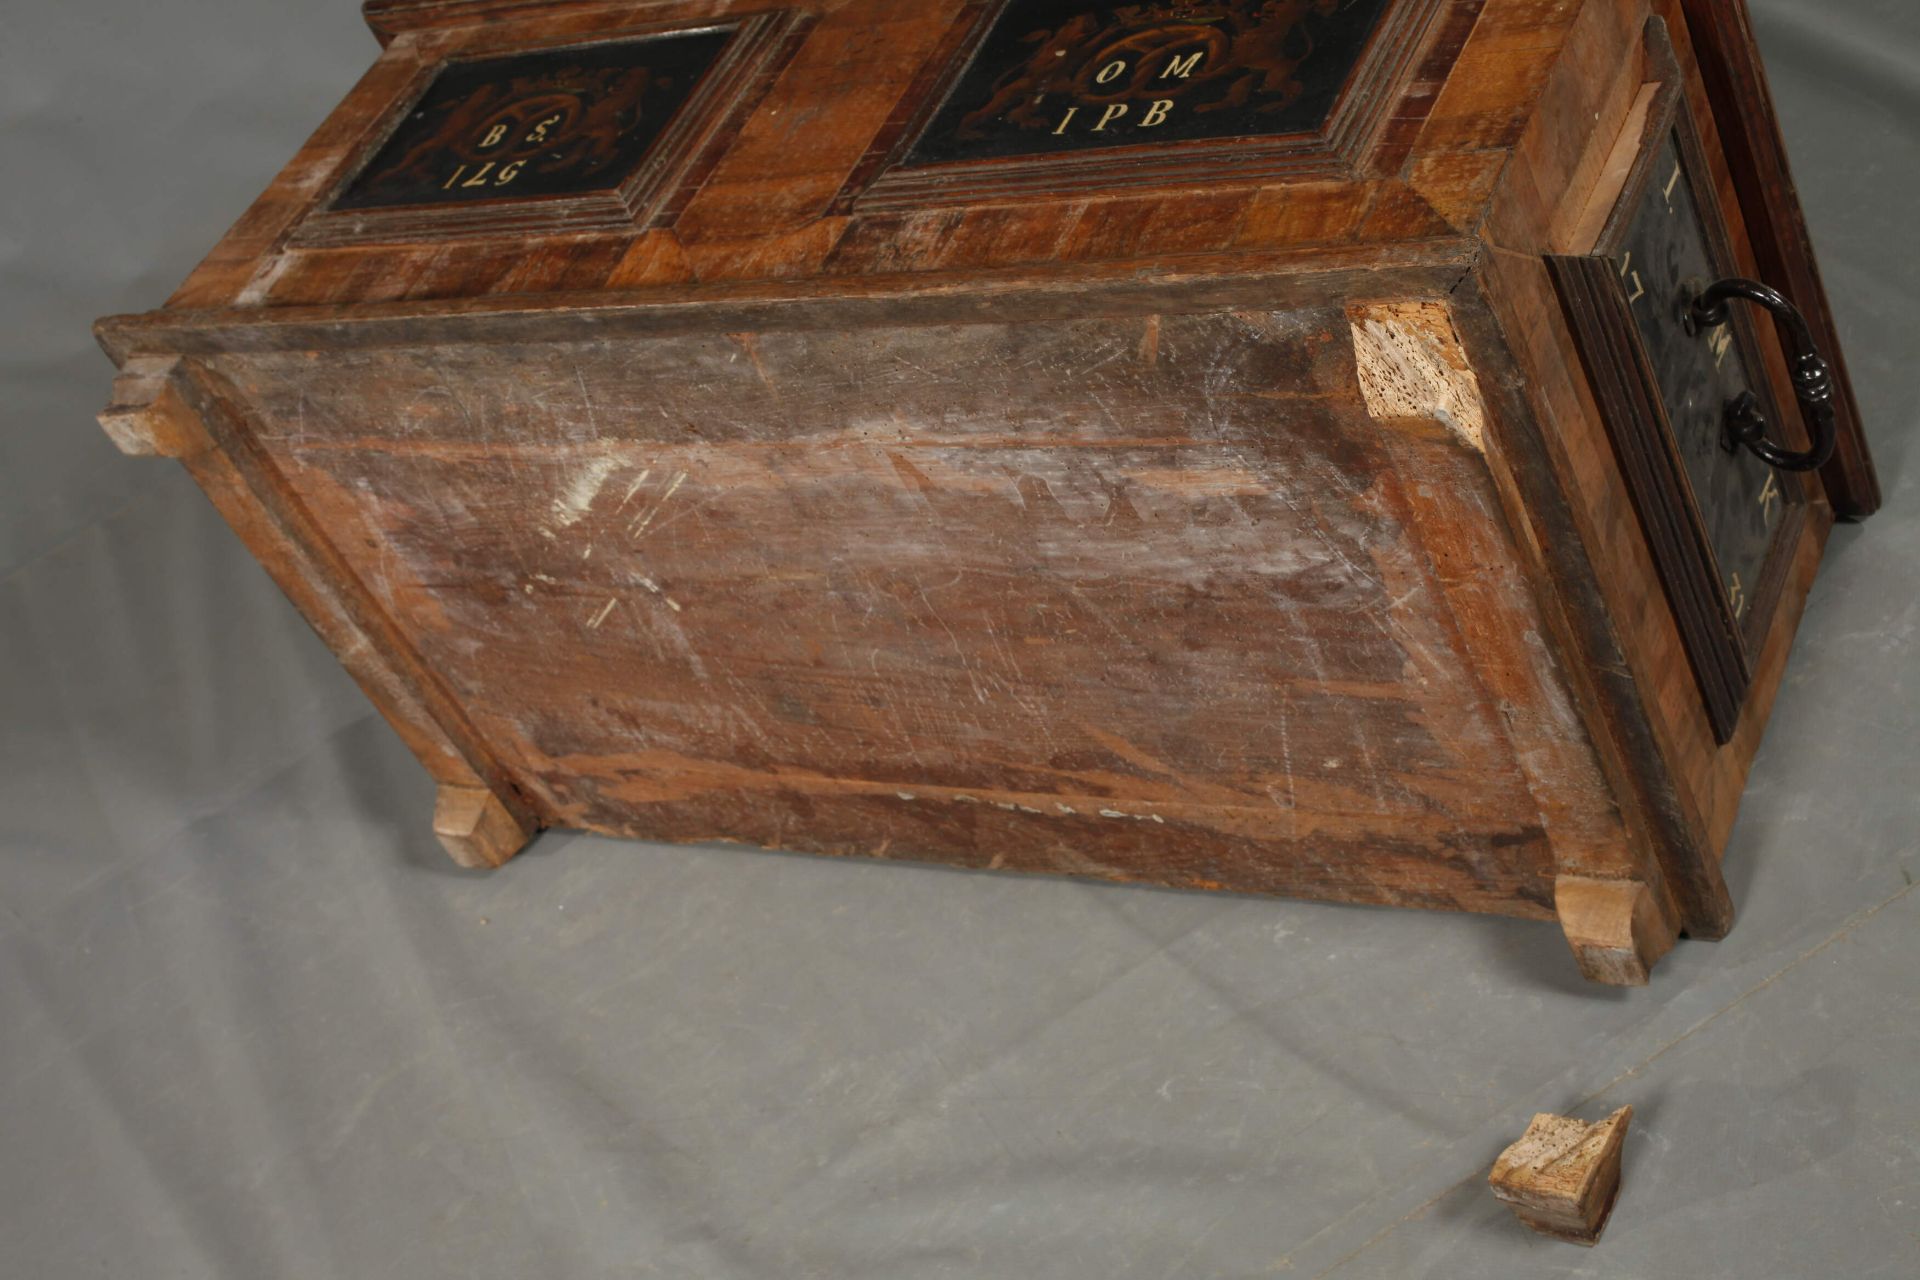 Inguild chest of the bakers' guild - Image 6 of 8